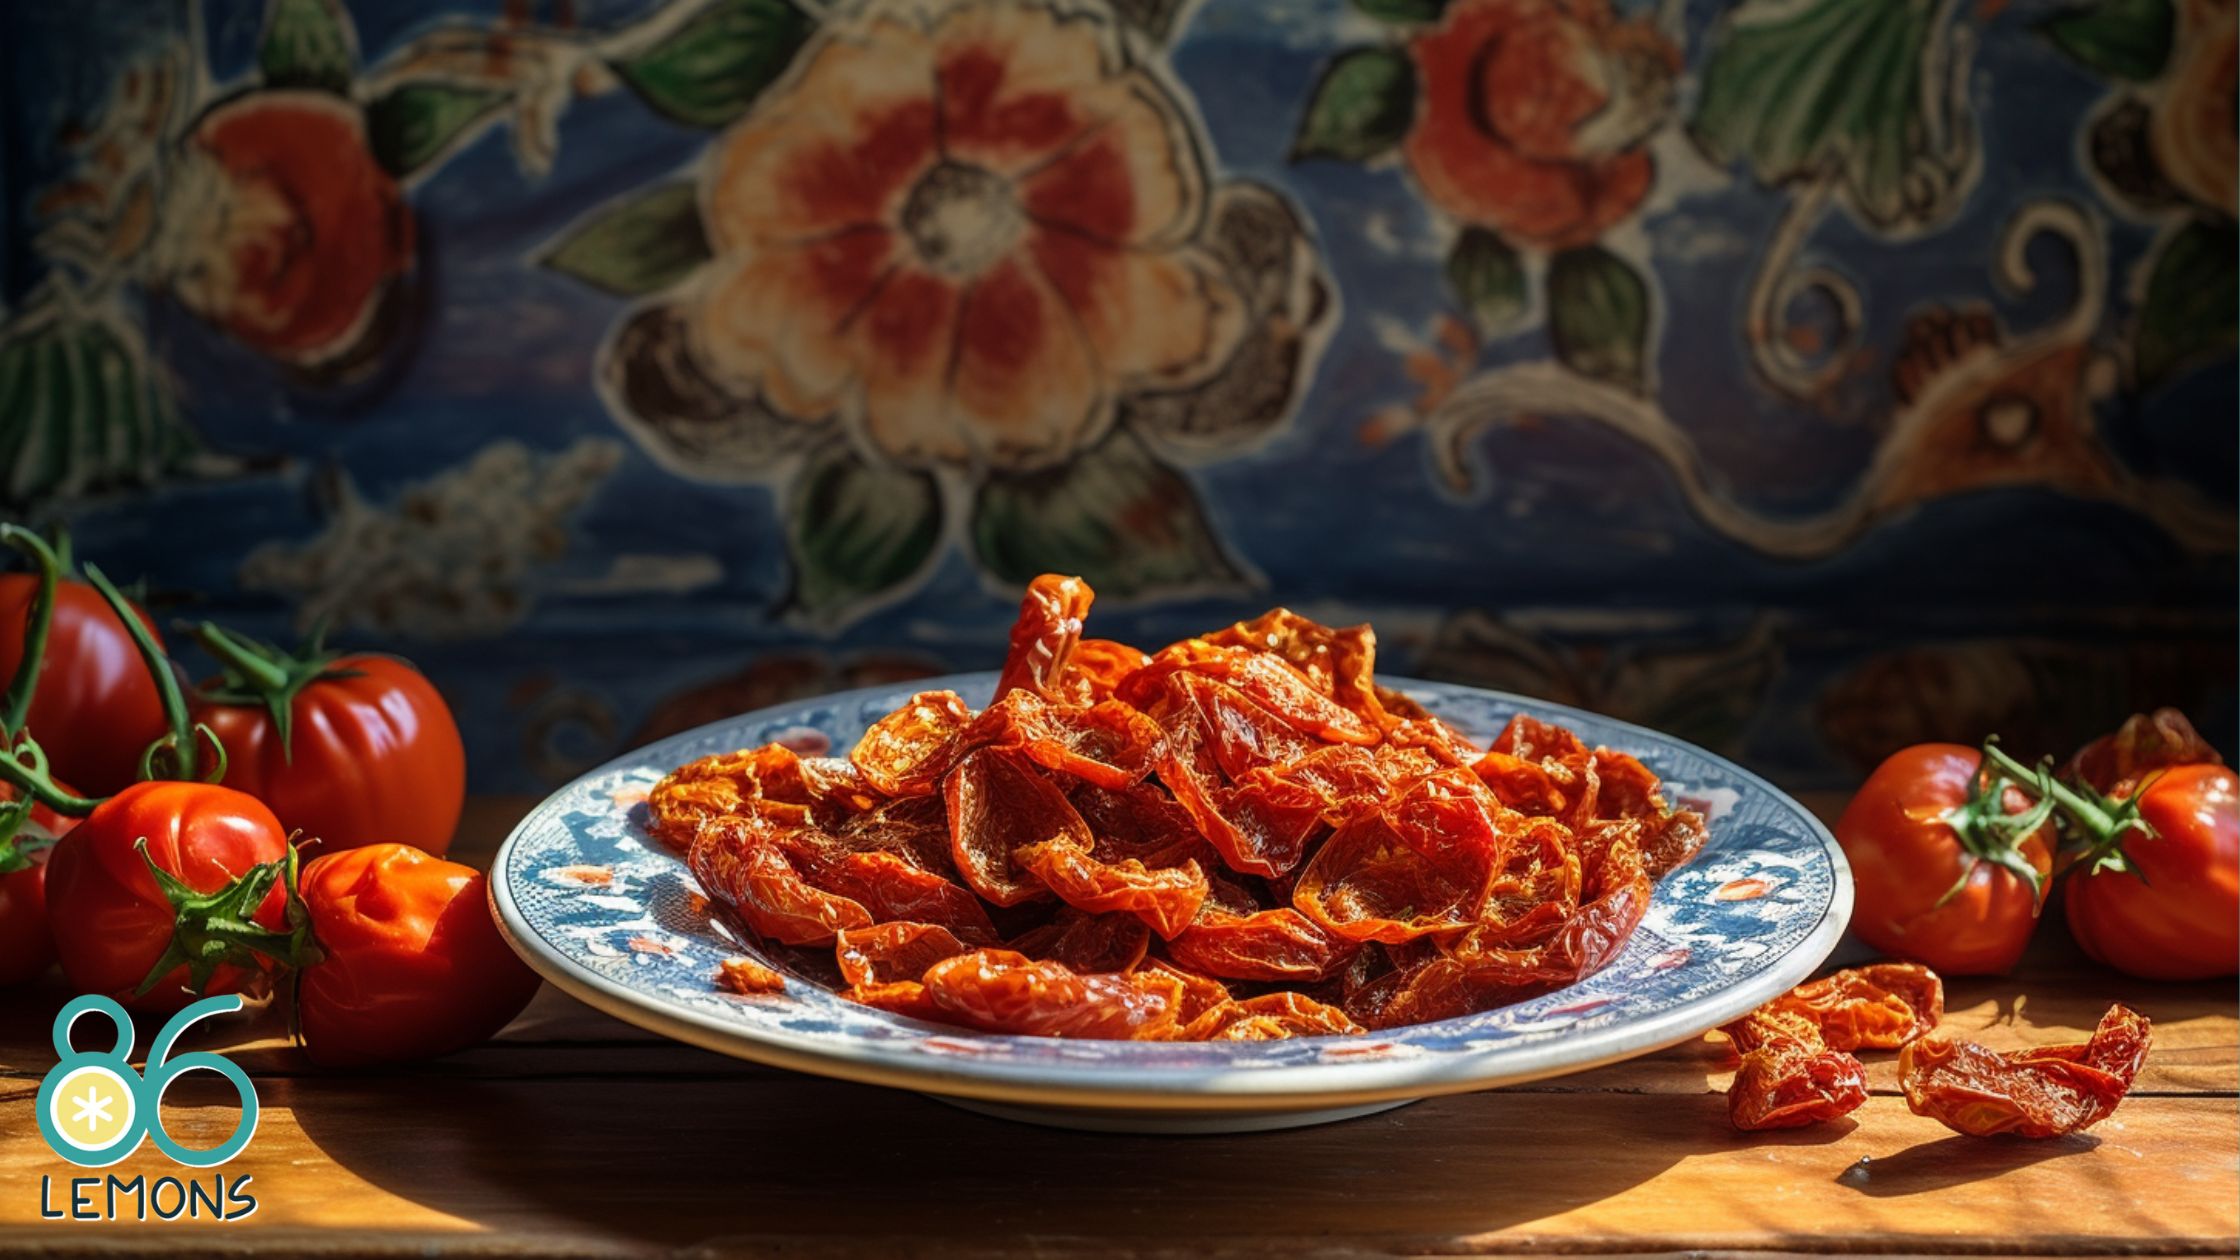 How to make sun-dried tomatoes with aromatic herbs